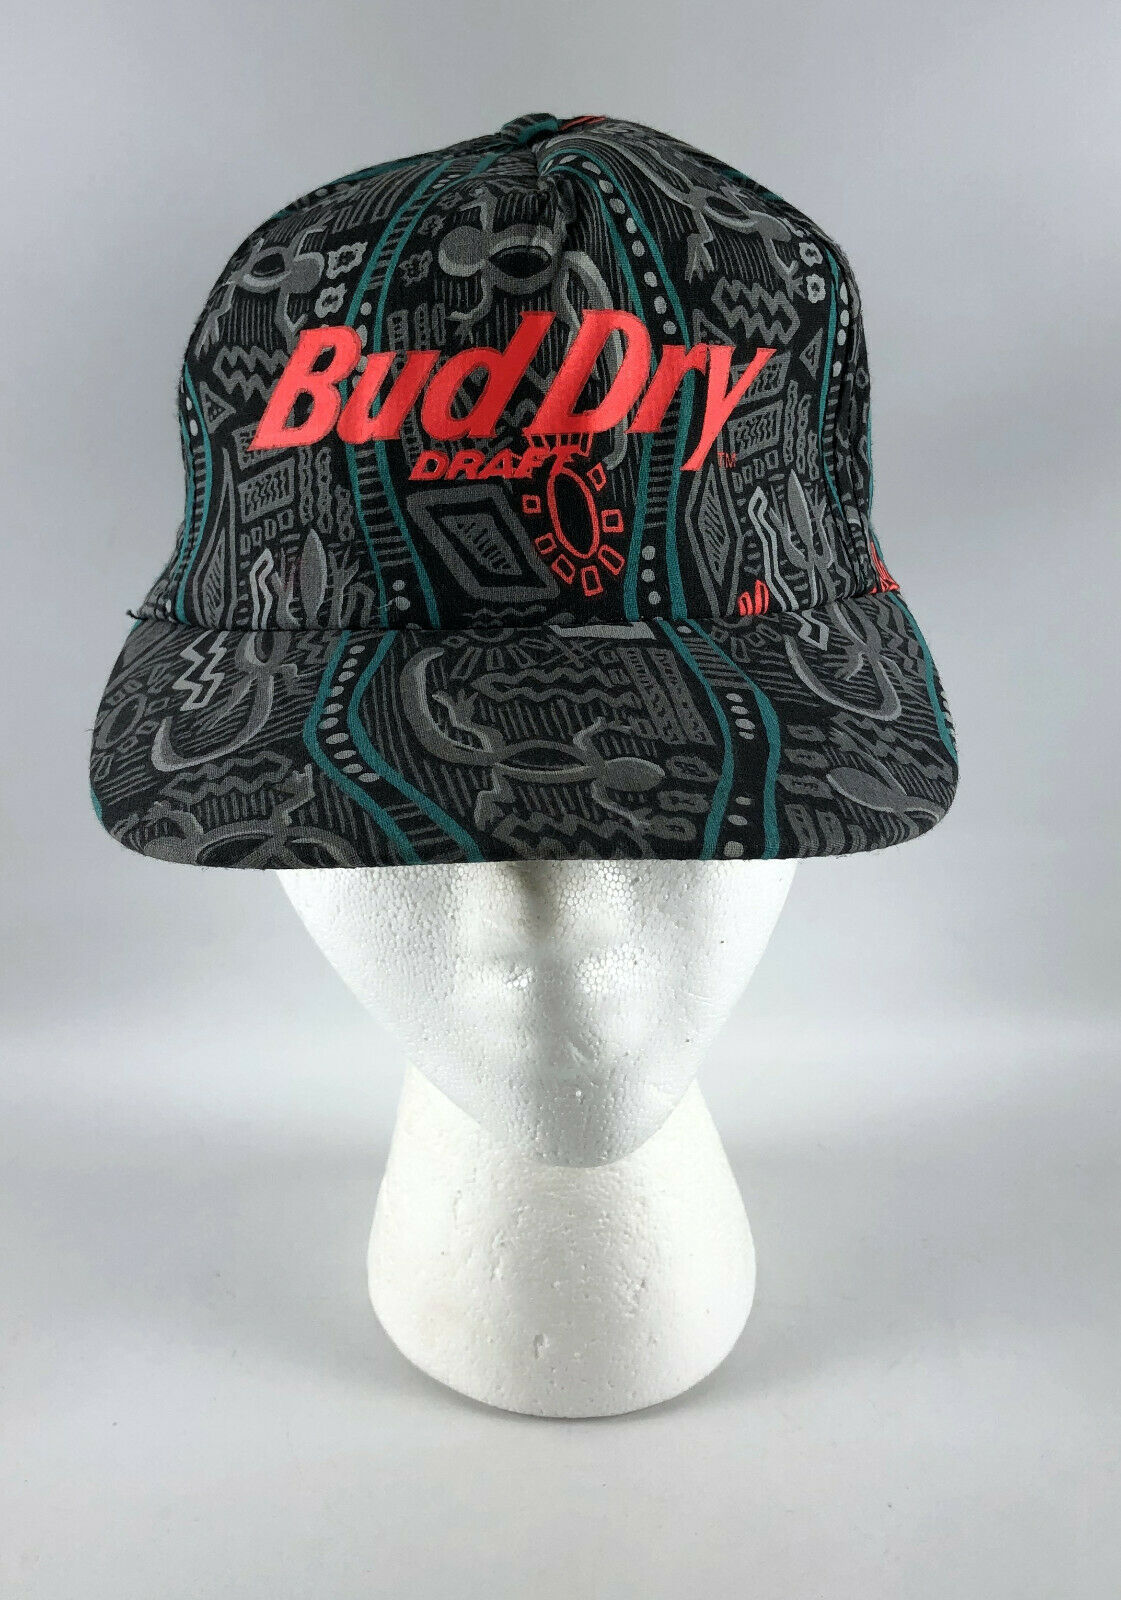 Vintage Bud Dry Draft Snapback Baseball Hat by Stylemaster - 1990s Gray Teal - $49.49